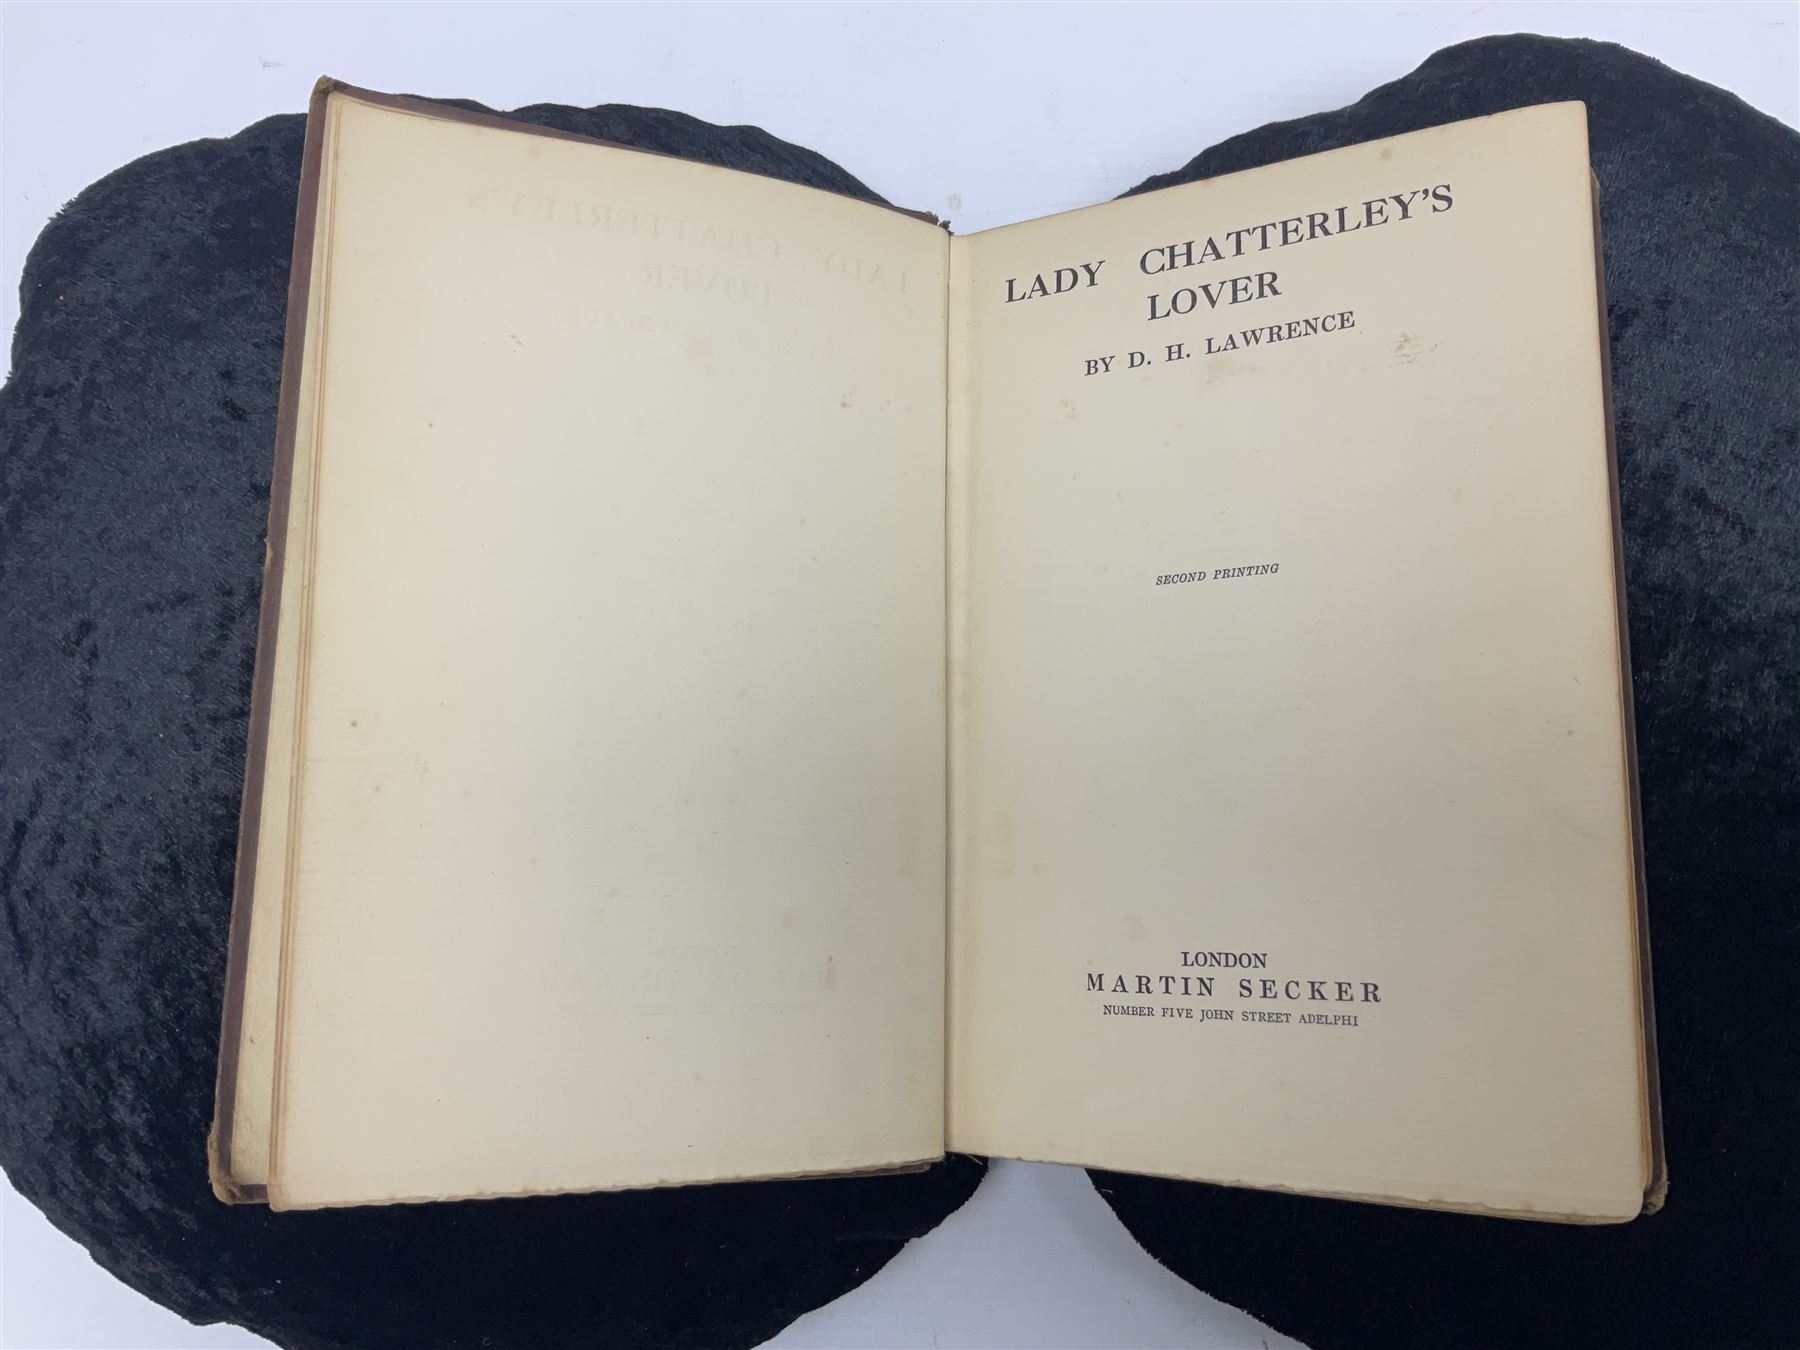 D.H Lawrence; Lady Chatterley's Lover - Image 8 of 12